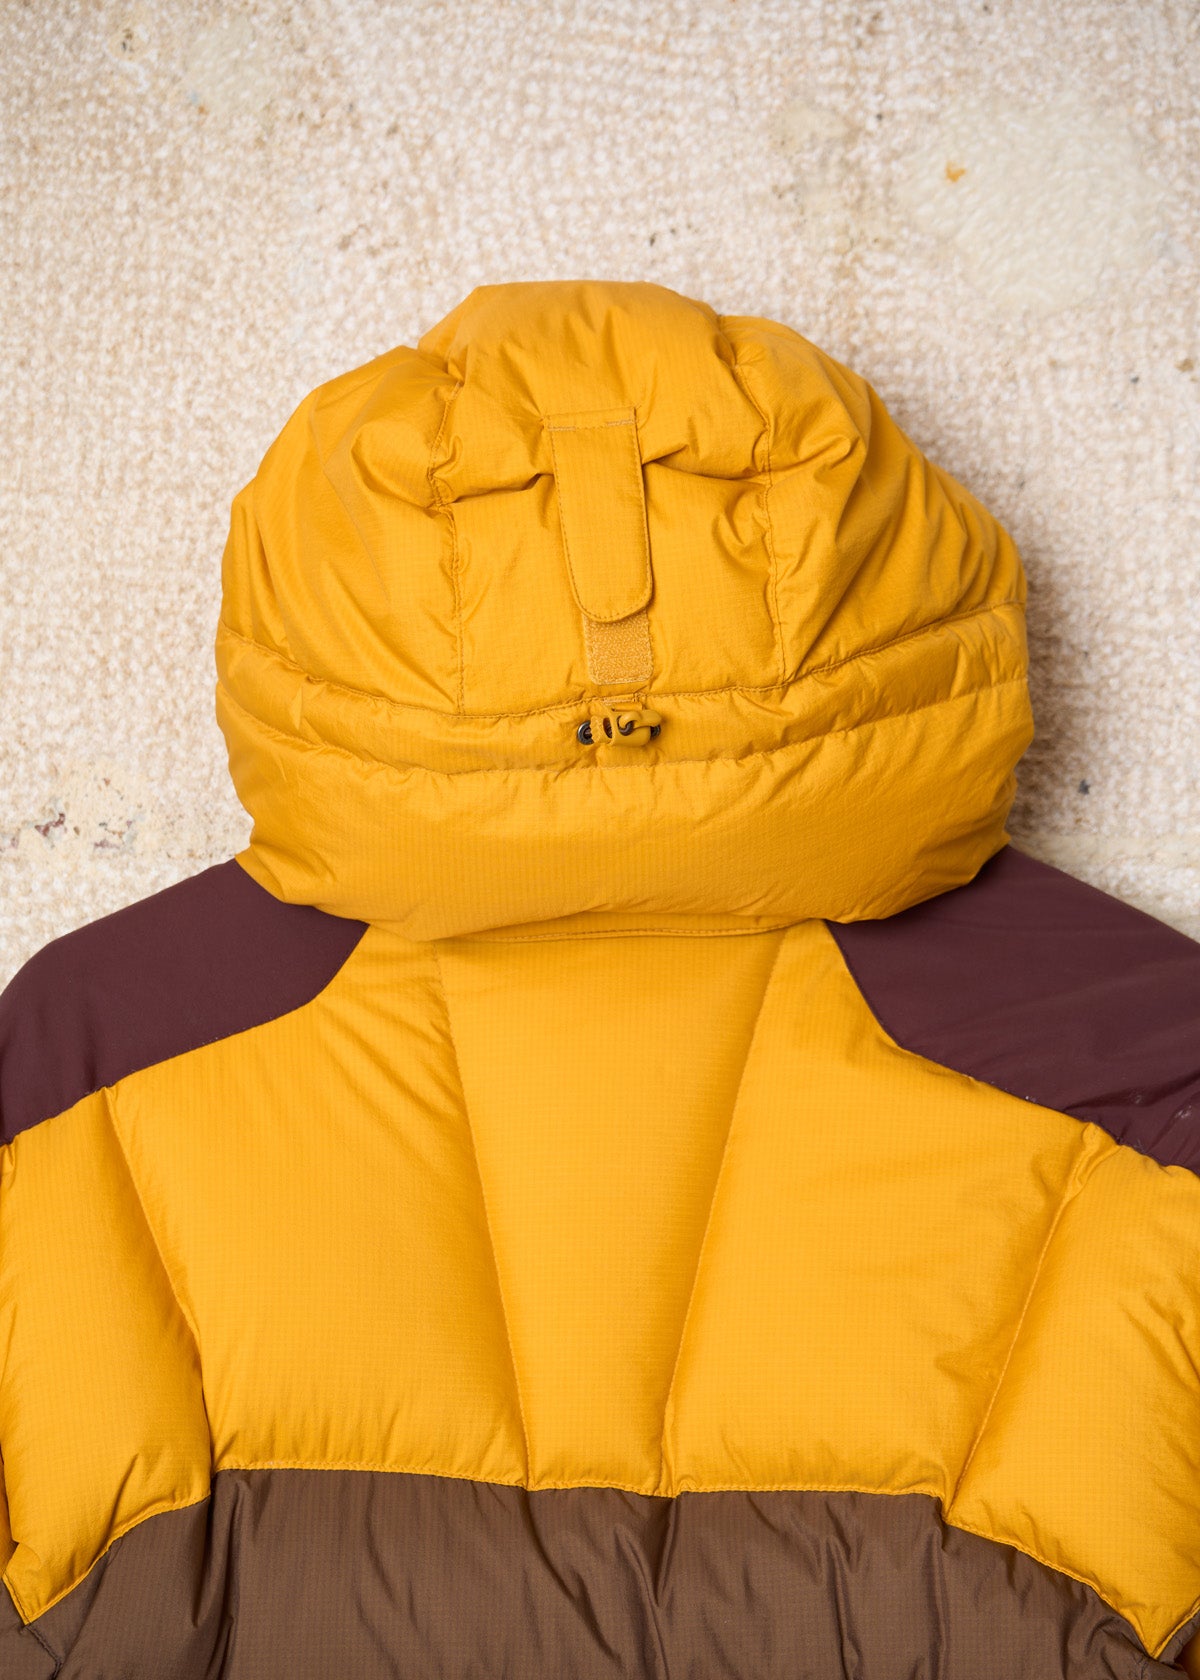 Yellow Brown Skiing Down Jacket 2000's - Large